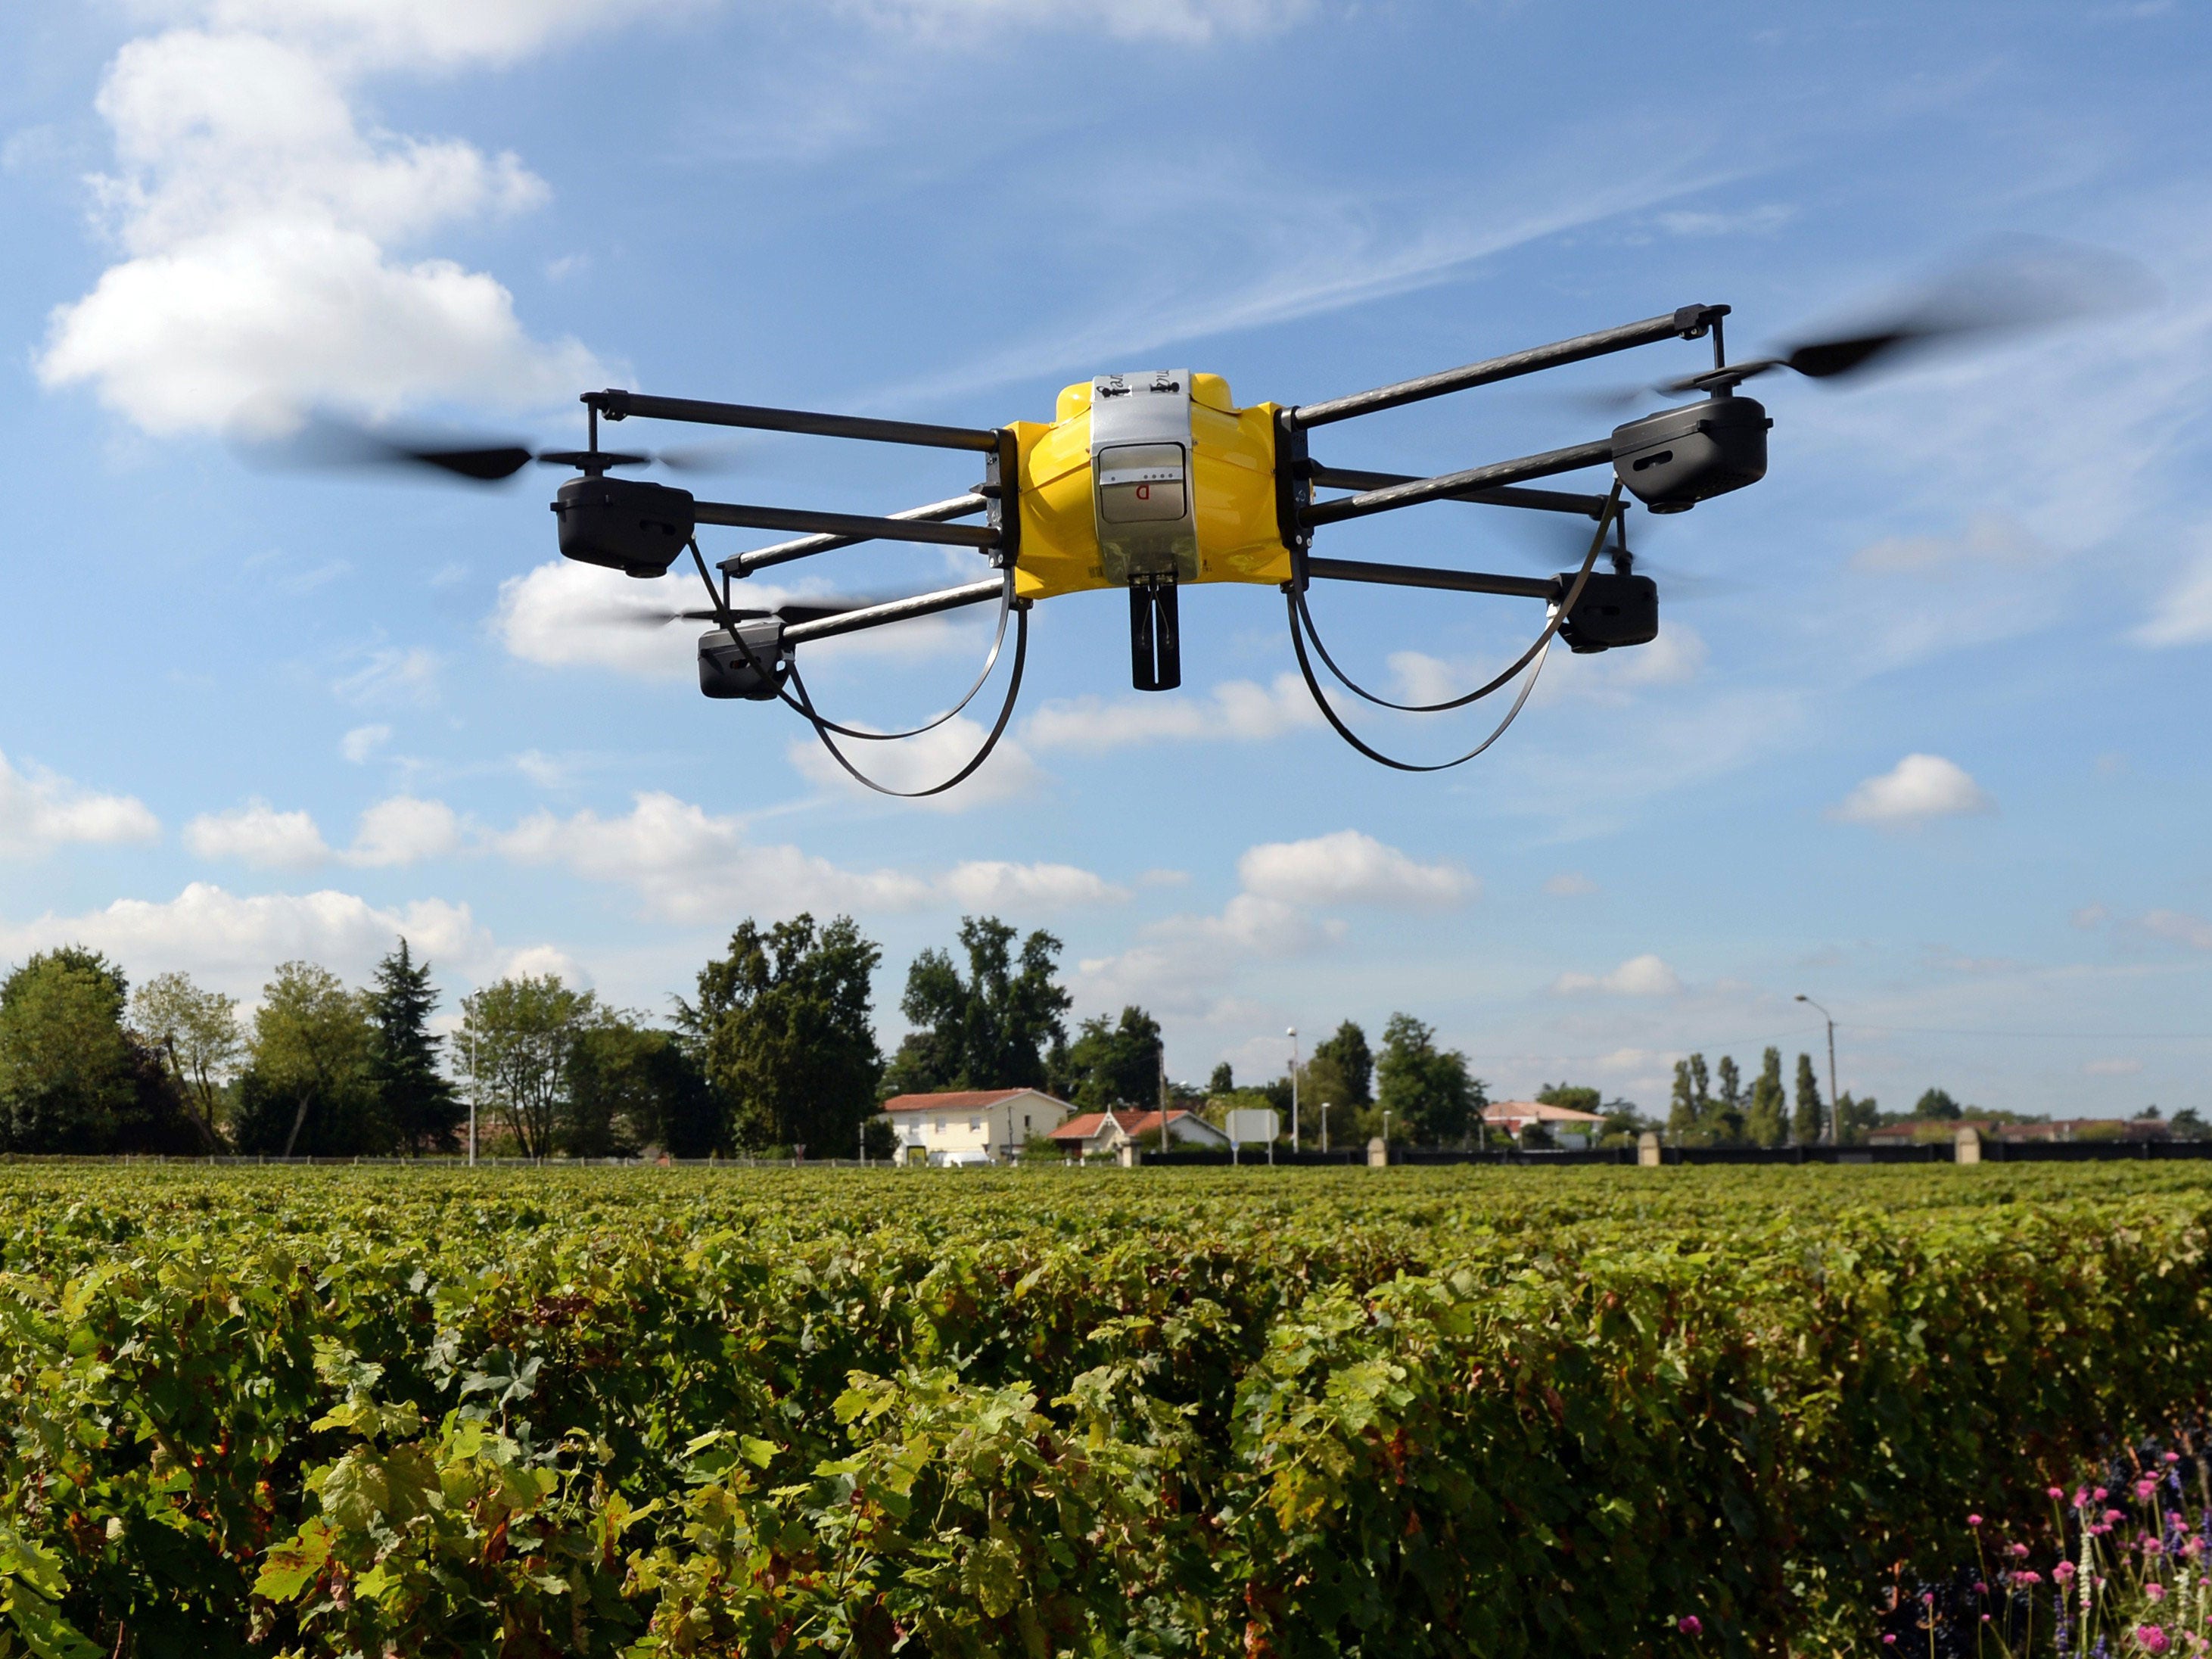 French winemaker Bernard Magrez uses a drone with an infrared camera to determine the optimal maturity of his grapes so he can harvest them at different times